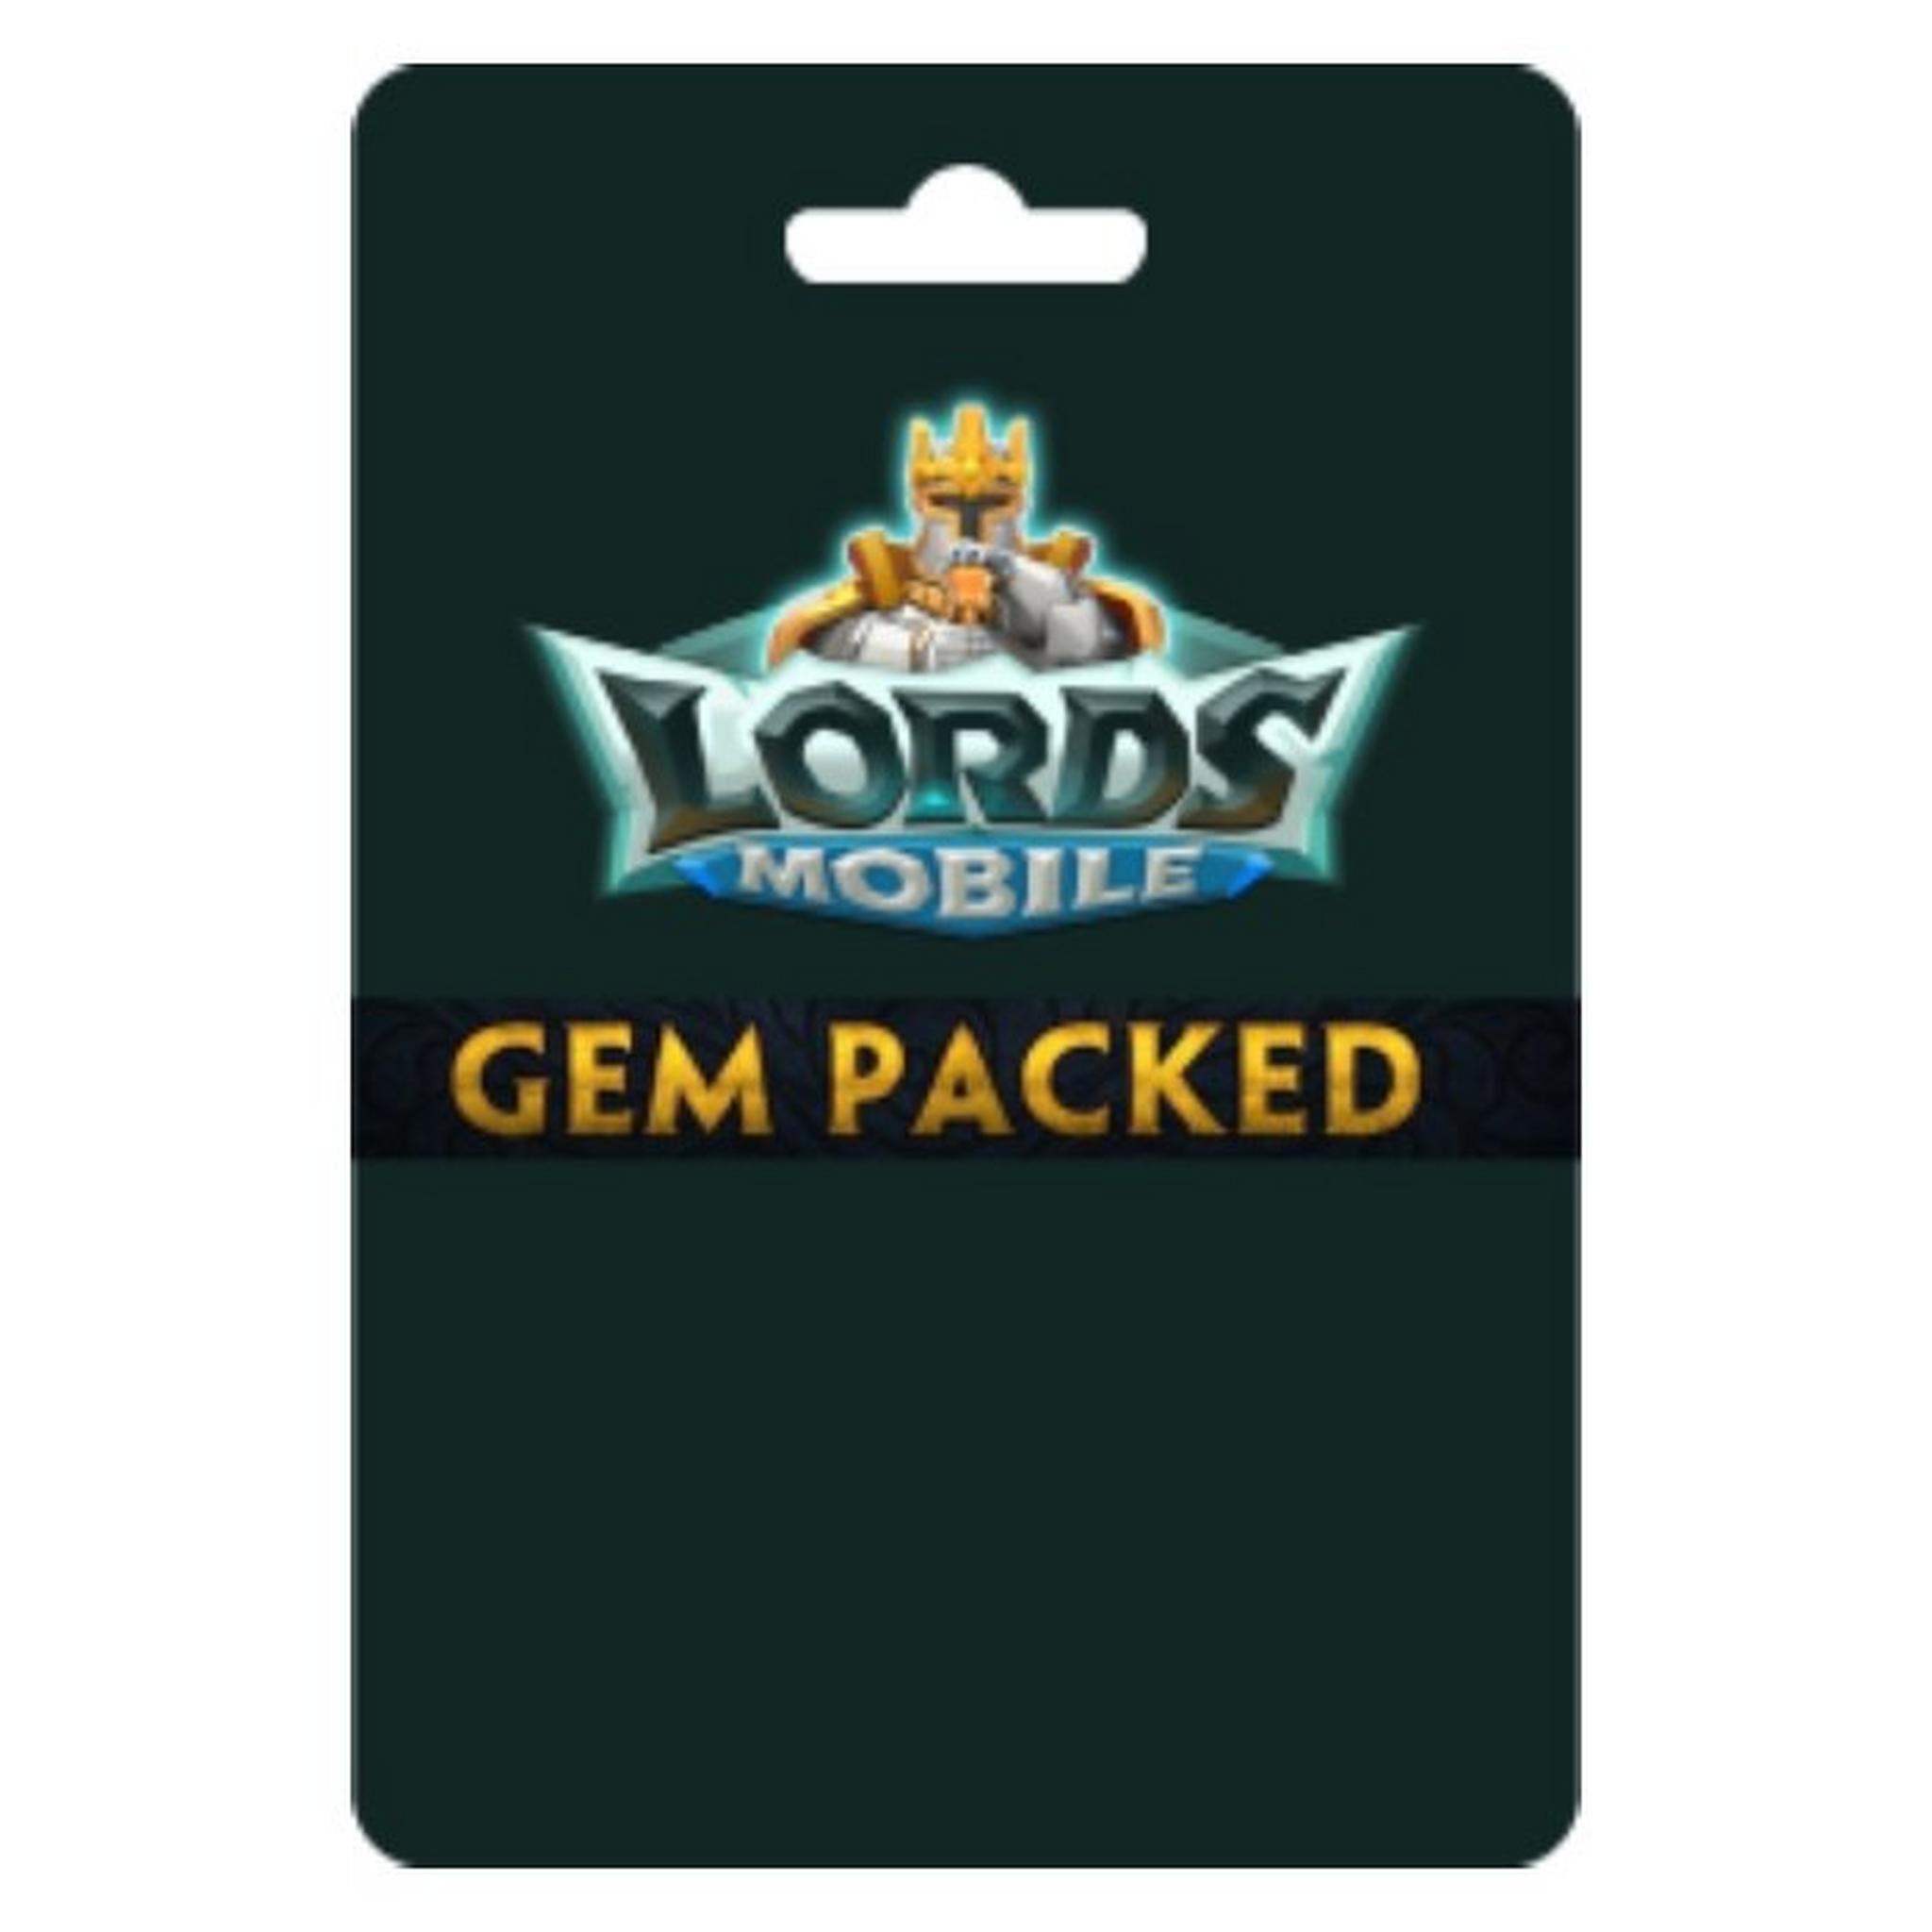 Lords Mobile Card - Gem Packed